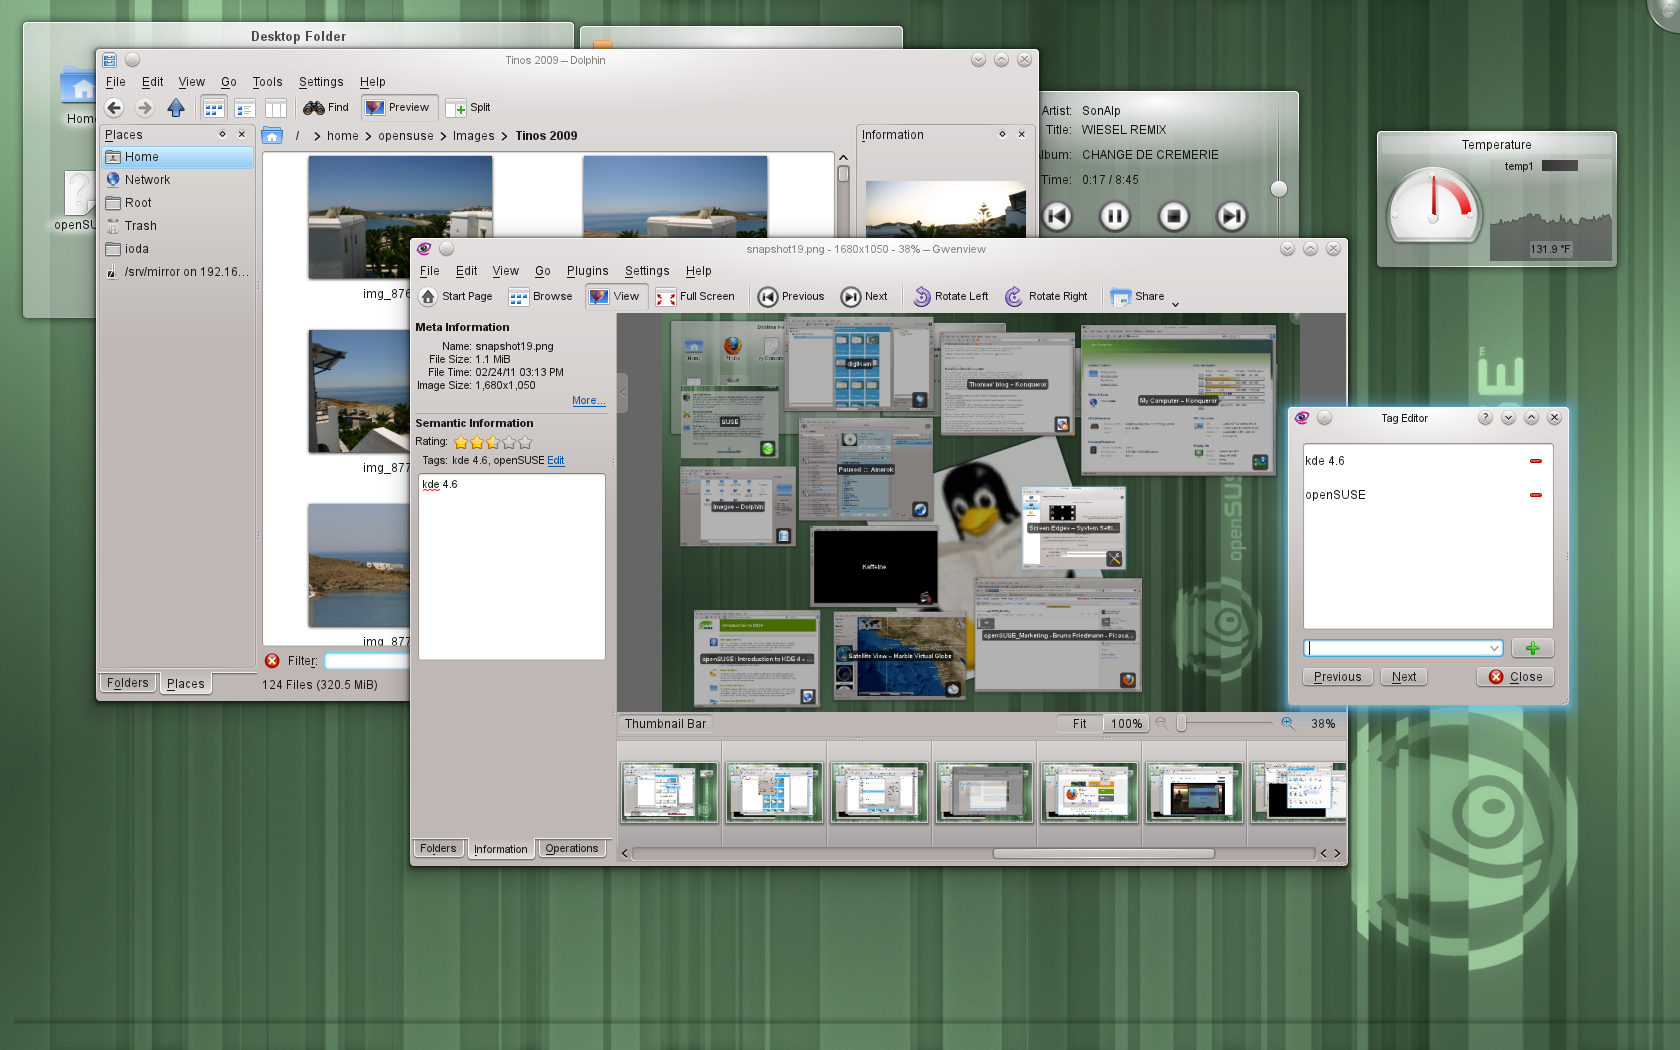 openSUSE KDE desktop with Dolphin and Gwenview